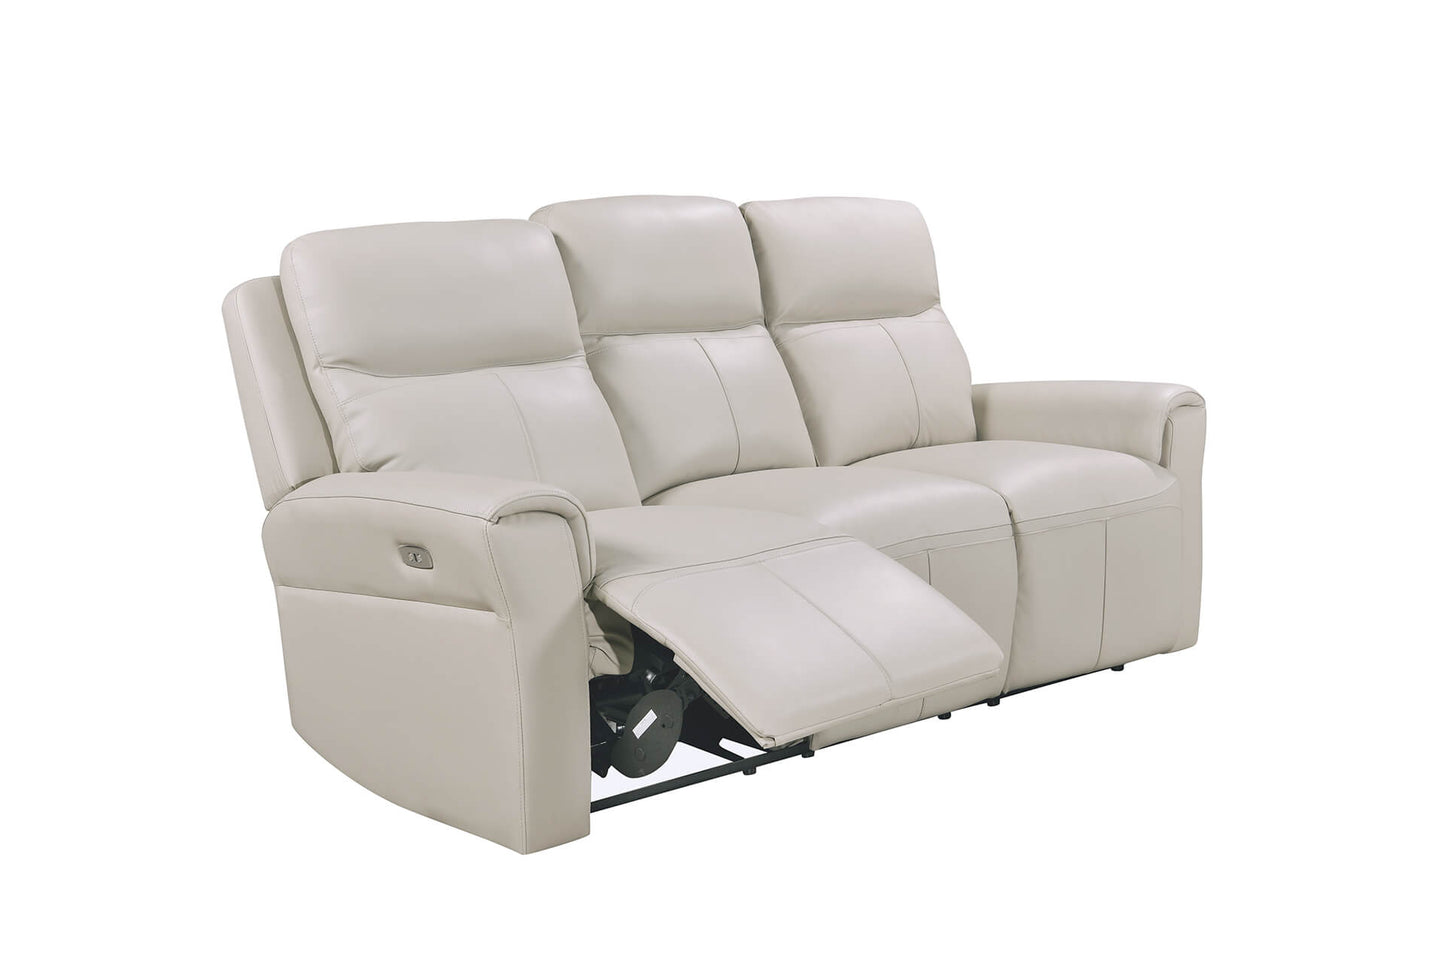 Russo - 3 Seater - Electric Recliner - Stone Leather